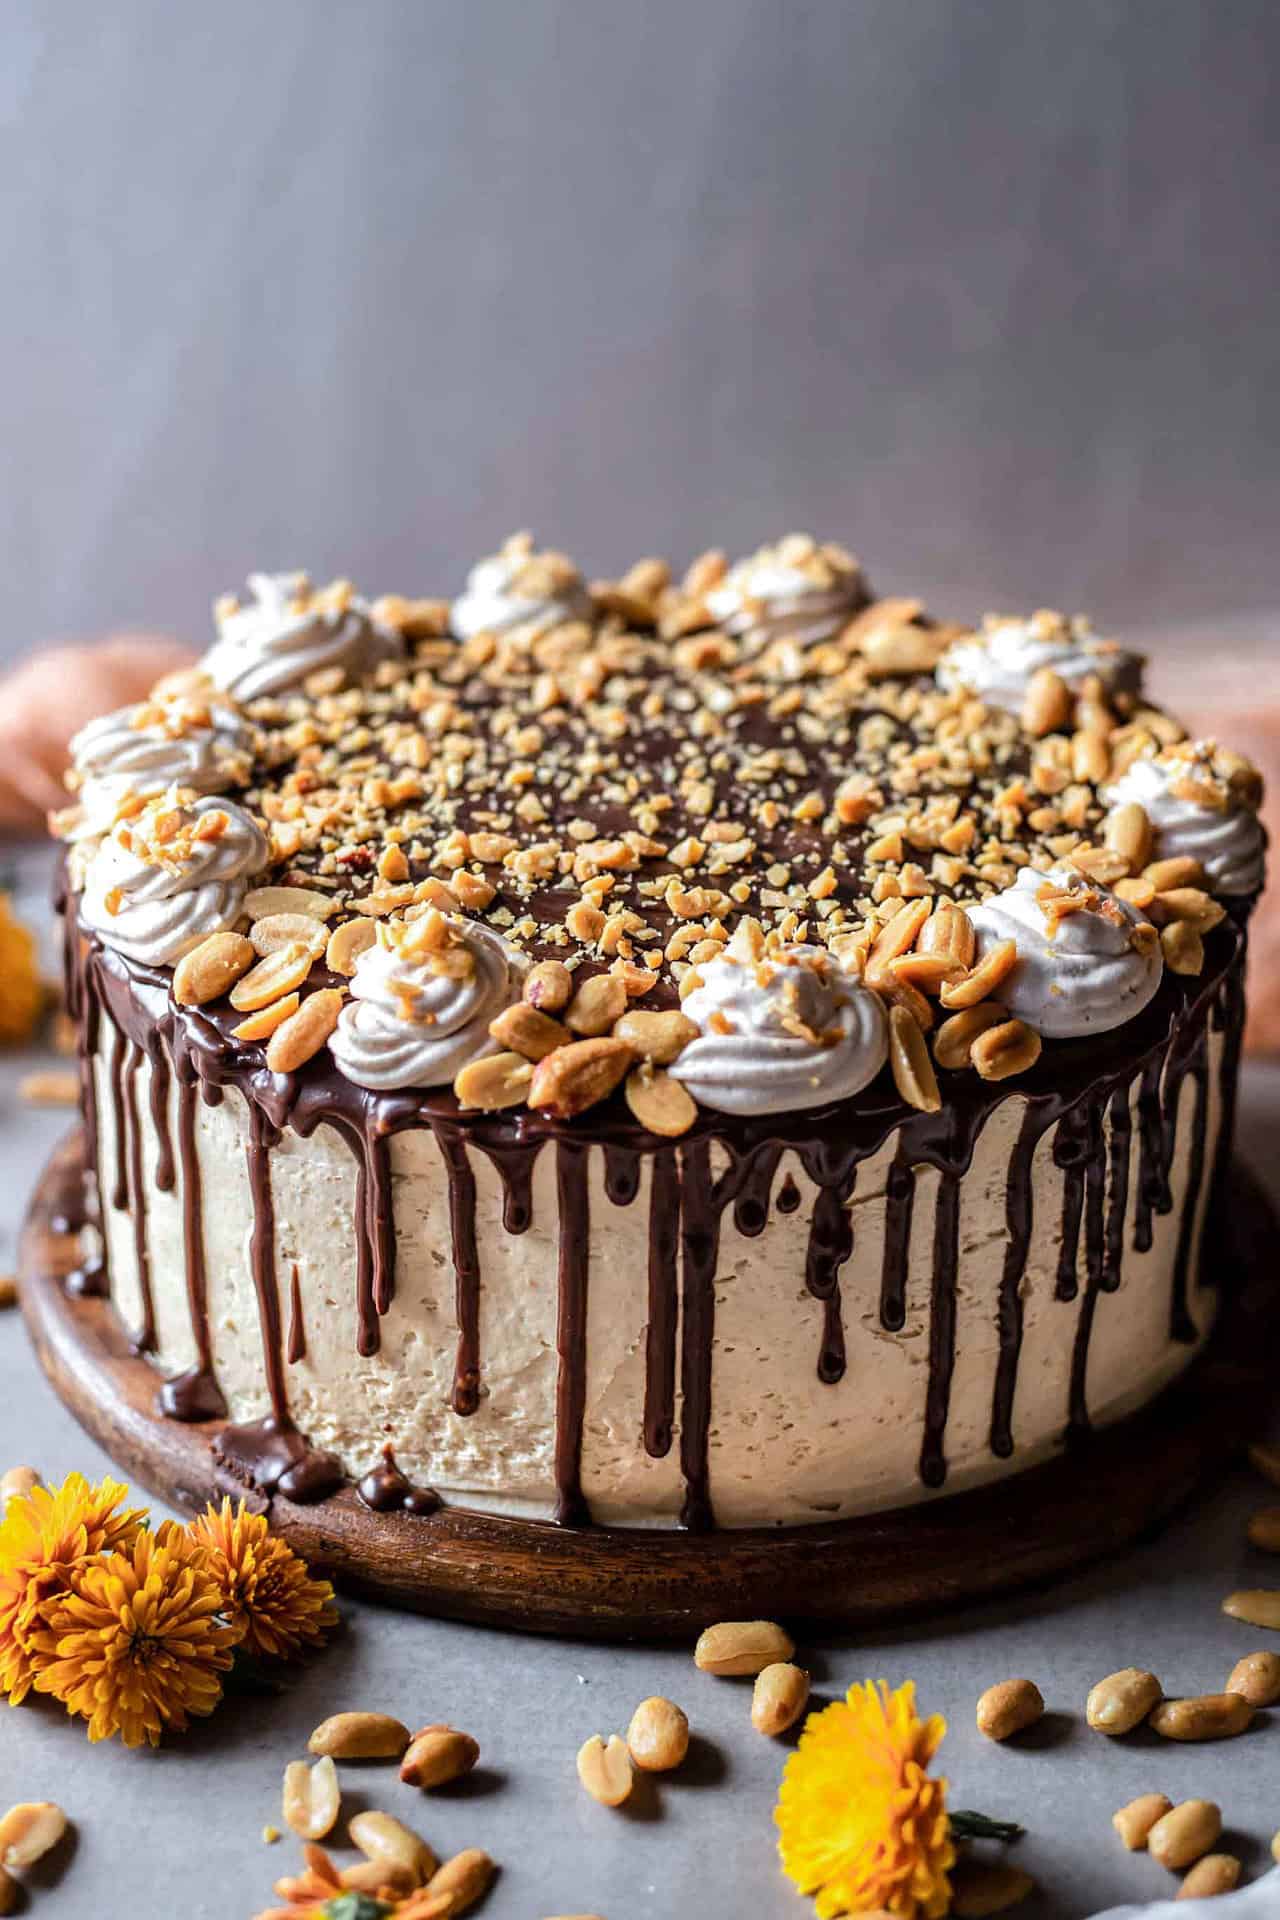 This gluten-free chocolate peanut butter cake is perfectly sweetened, moist, soft, super chocolaty, peanut butter infused, rich, flavorful and so delicious!